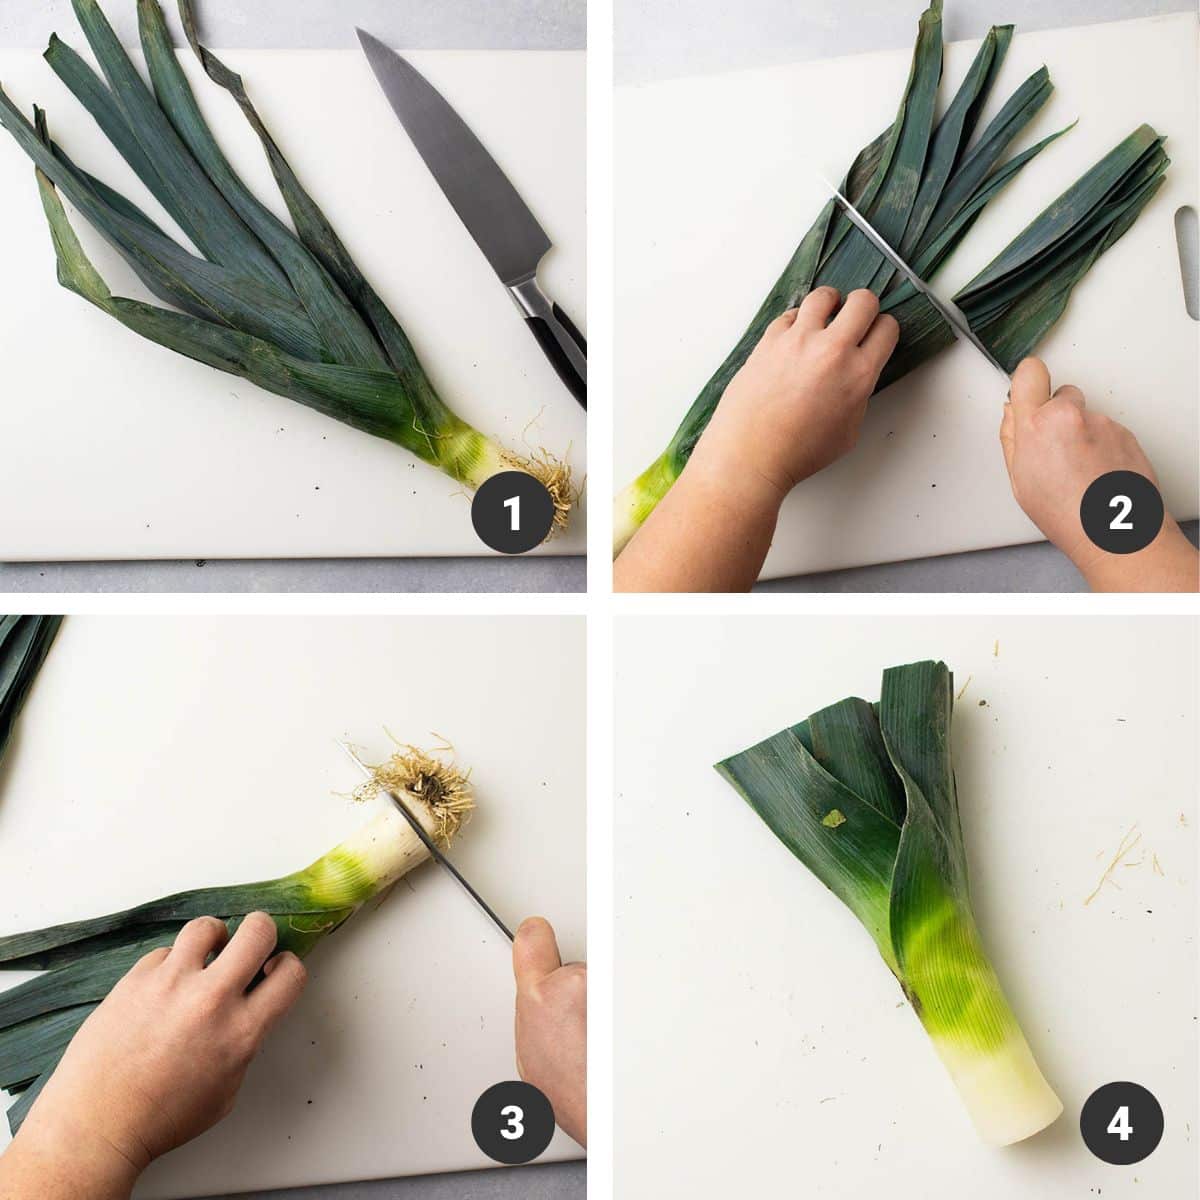 Using a knife to trim the top and bottom ends off a leek.